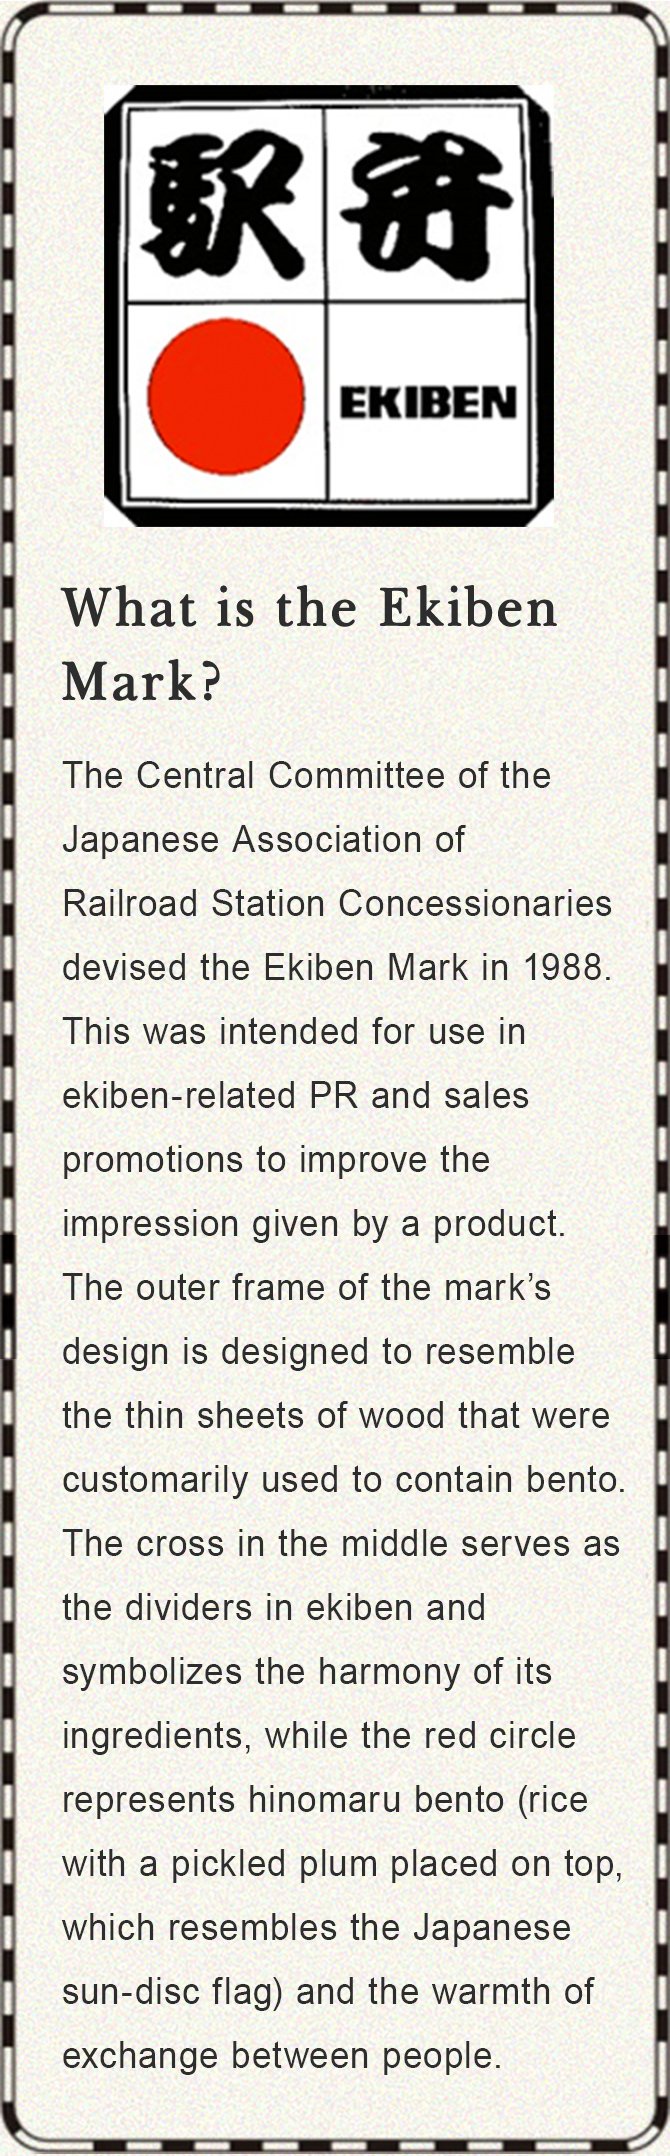 What is the Ekiben Mark? The Central Committee of the Japanese Association of Railroad Station Concessionaries devised the Ekiben Mark in 1988. This was intended for use in ekiben-related PR and sales promotions to improve the impression given by a product. The outer frame of the mark’s design is designed to resemble the thin sheets of wood that were customarily used to contain bento. The cross in the middle serves as the dividers in ekiben and symbolizes the harmony of its ingredients, while the red circle represents hinomaru bento (rice with a pickled plum placed on top, which resembles the Japanese sun-disc flag) and the warmth of exchange between people.